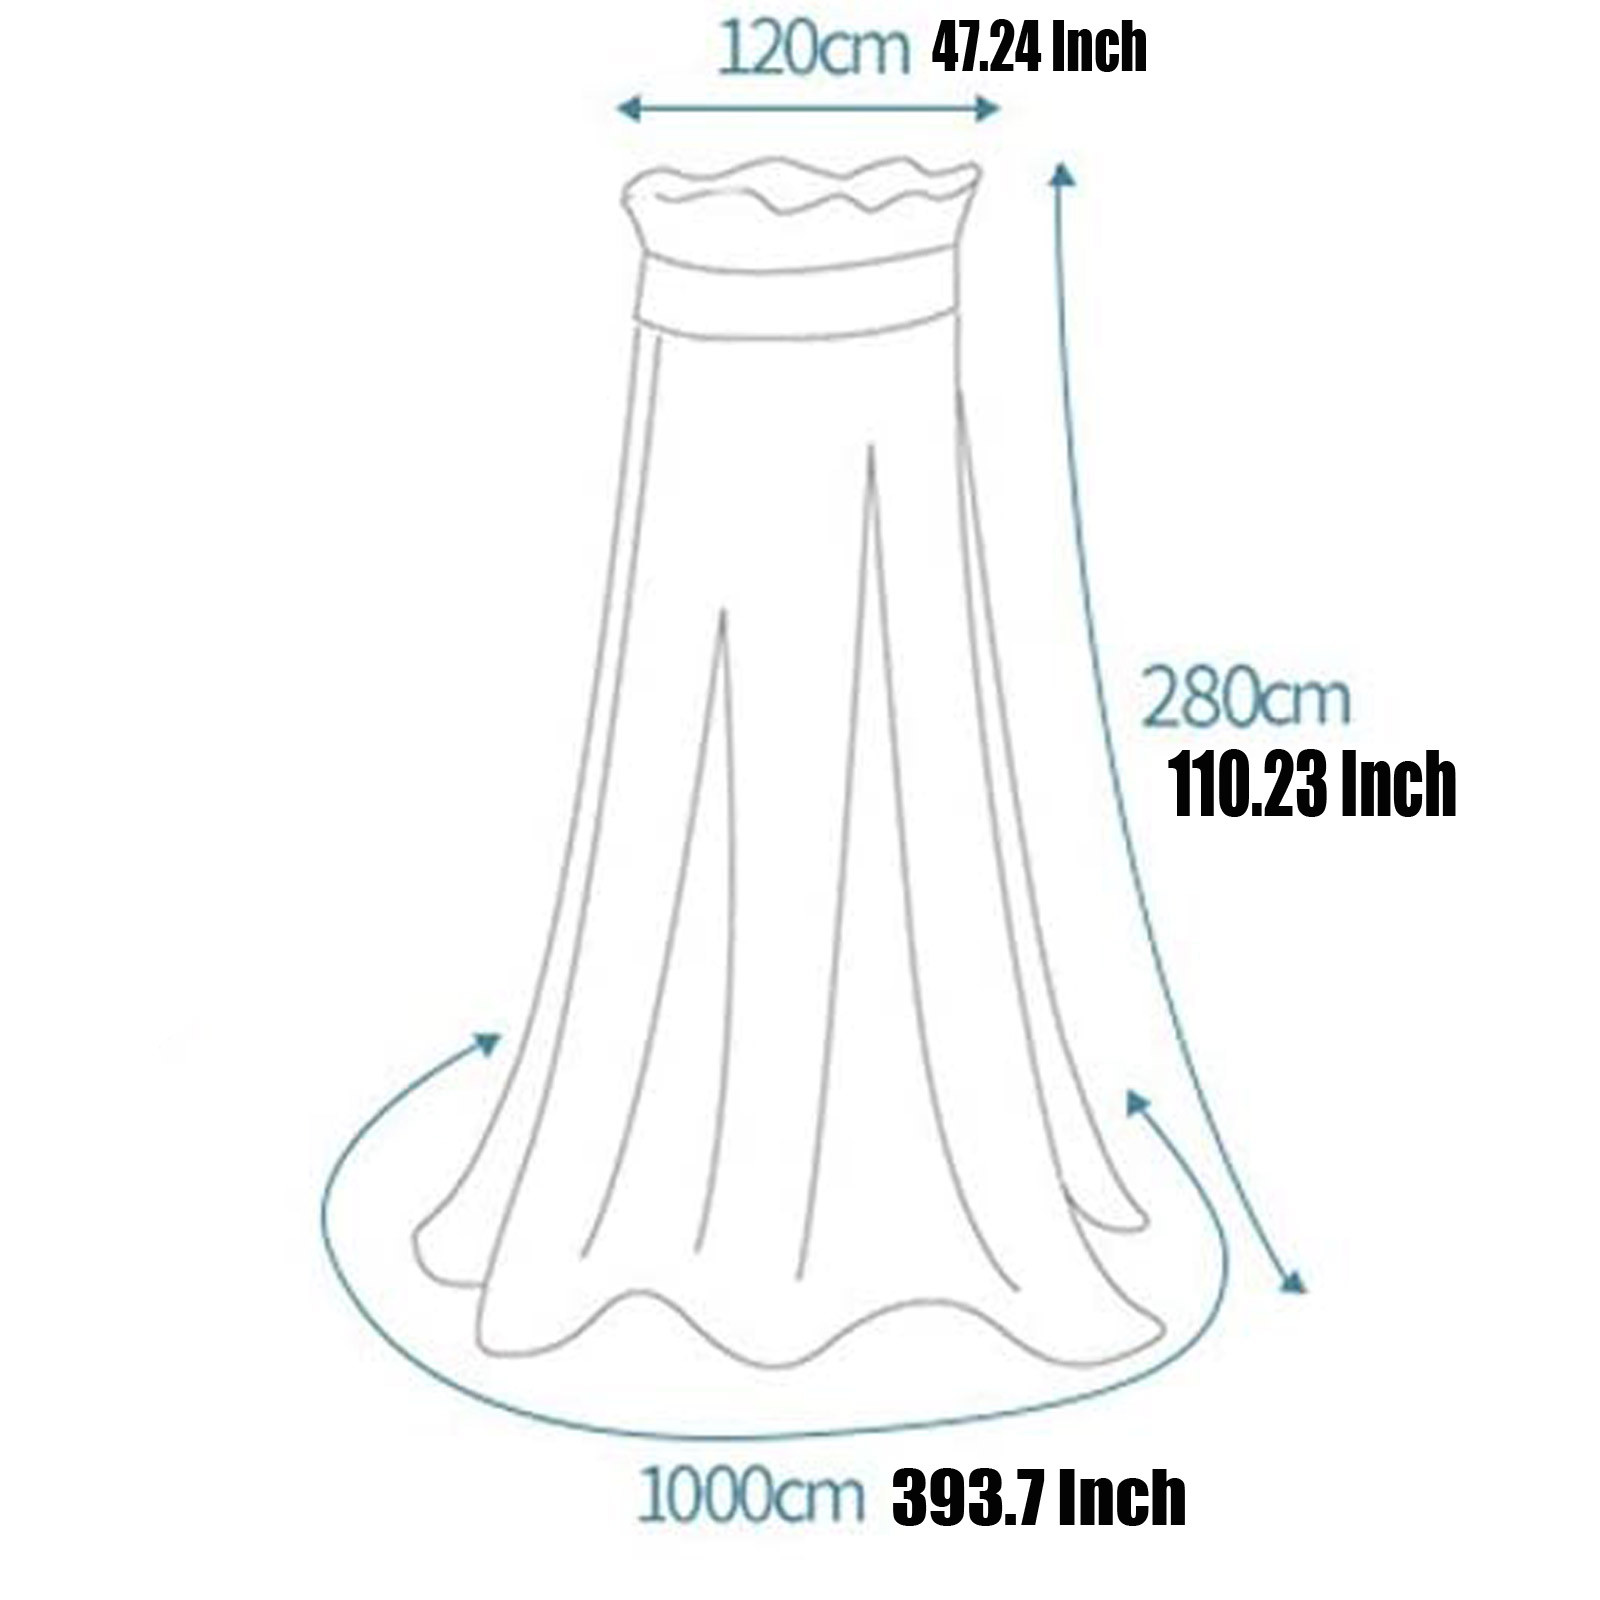 Gradient Princess Bed Curtain Tent Home Dome Foldable Bed Canopy with Hook Ceiling-Mounted Mosquito Net Free Installation